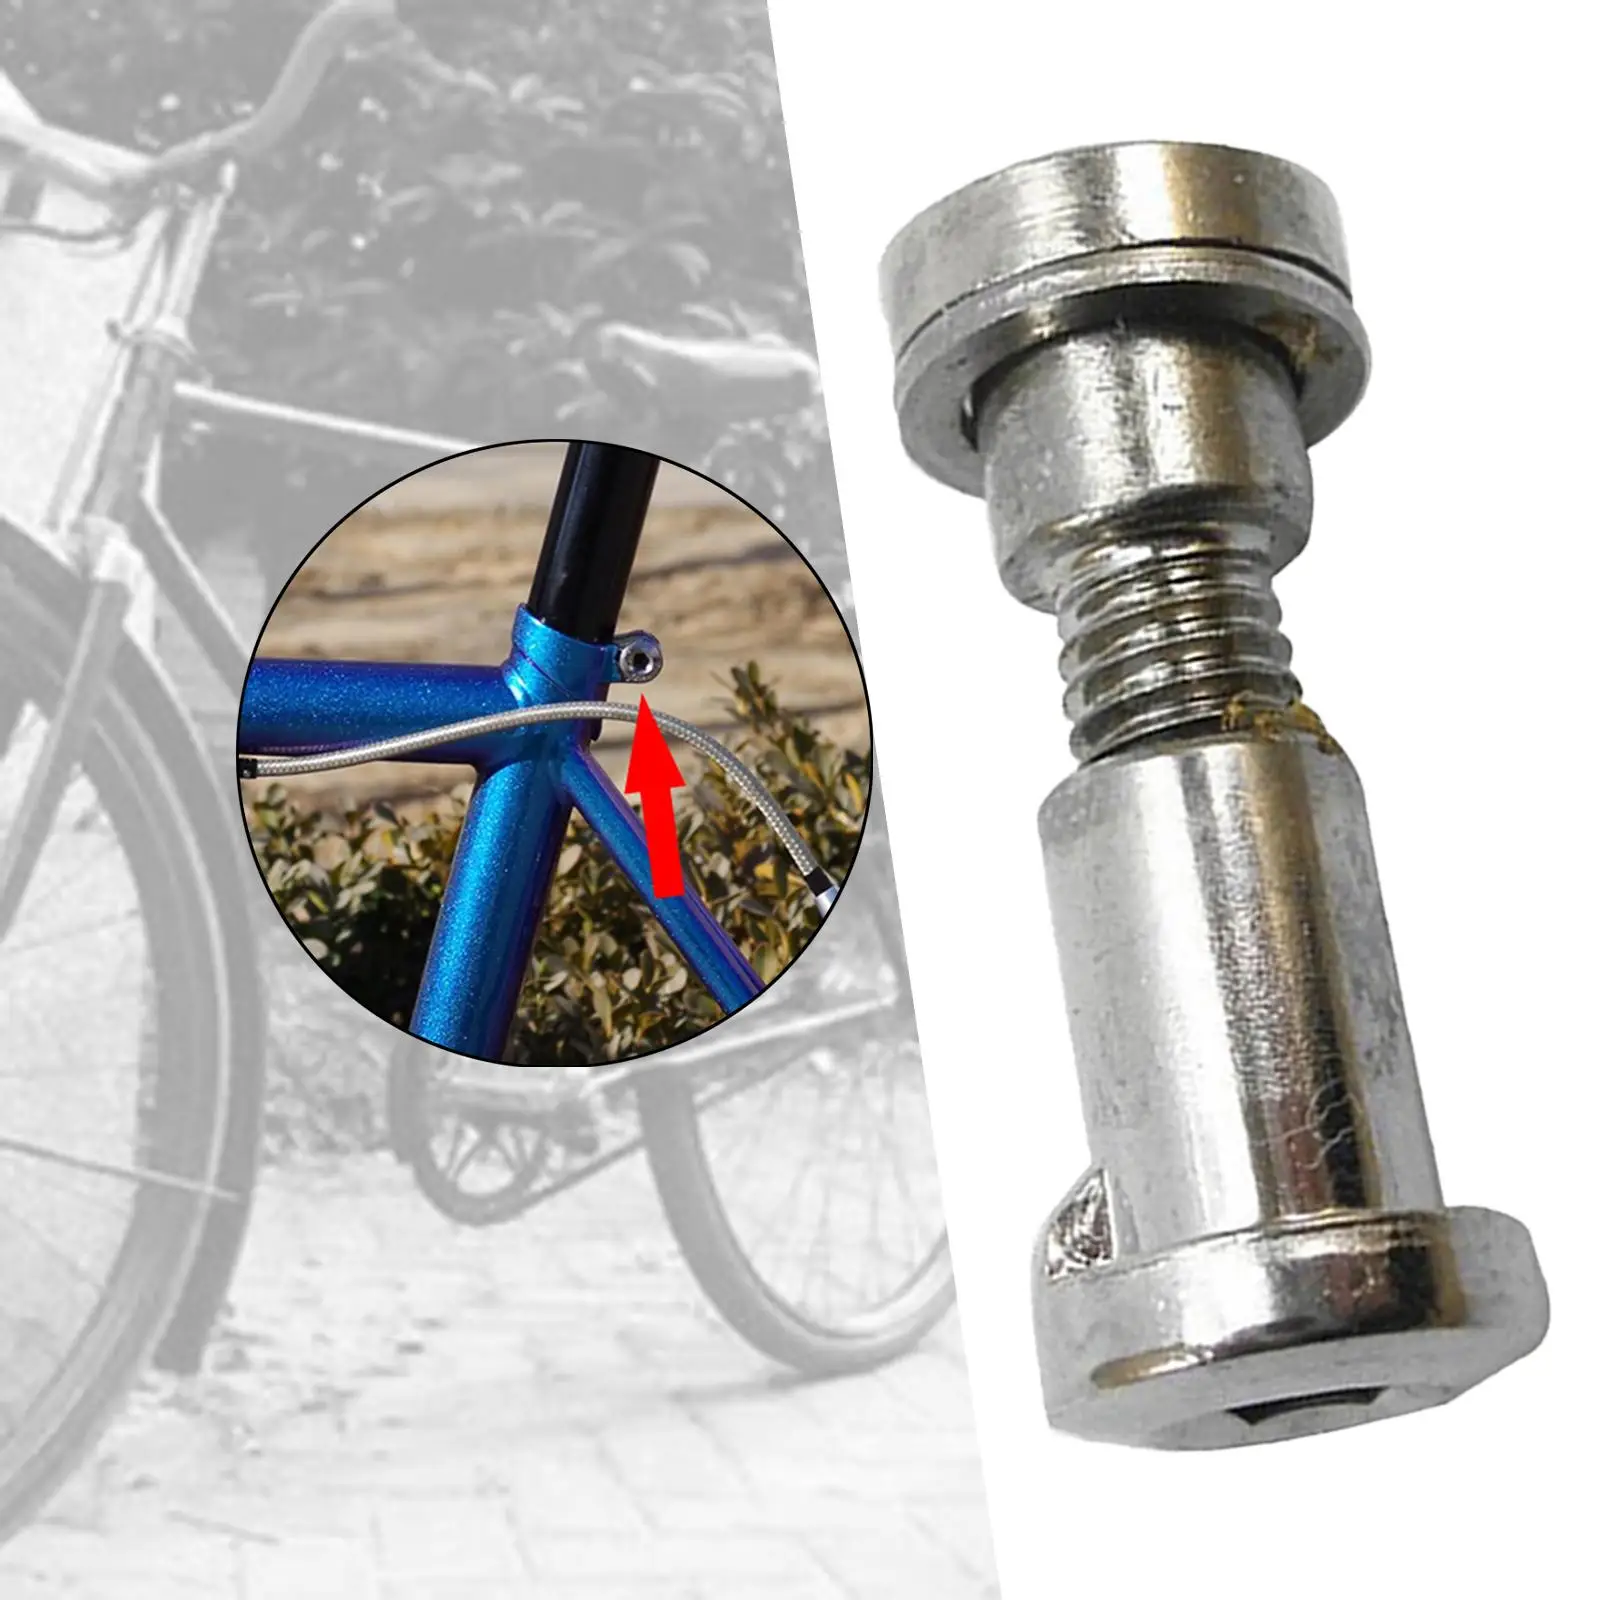 Bicycle Binder Parts 8mm 15-25mm Vintage Style Silver Precision Chrome Molybdenum Steel Bike Clamp Nut